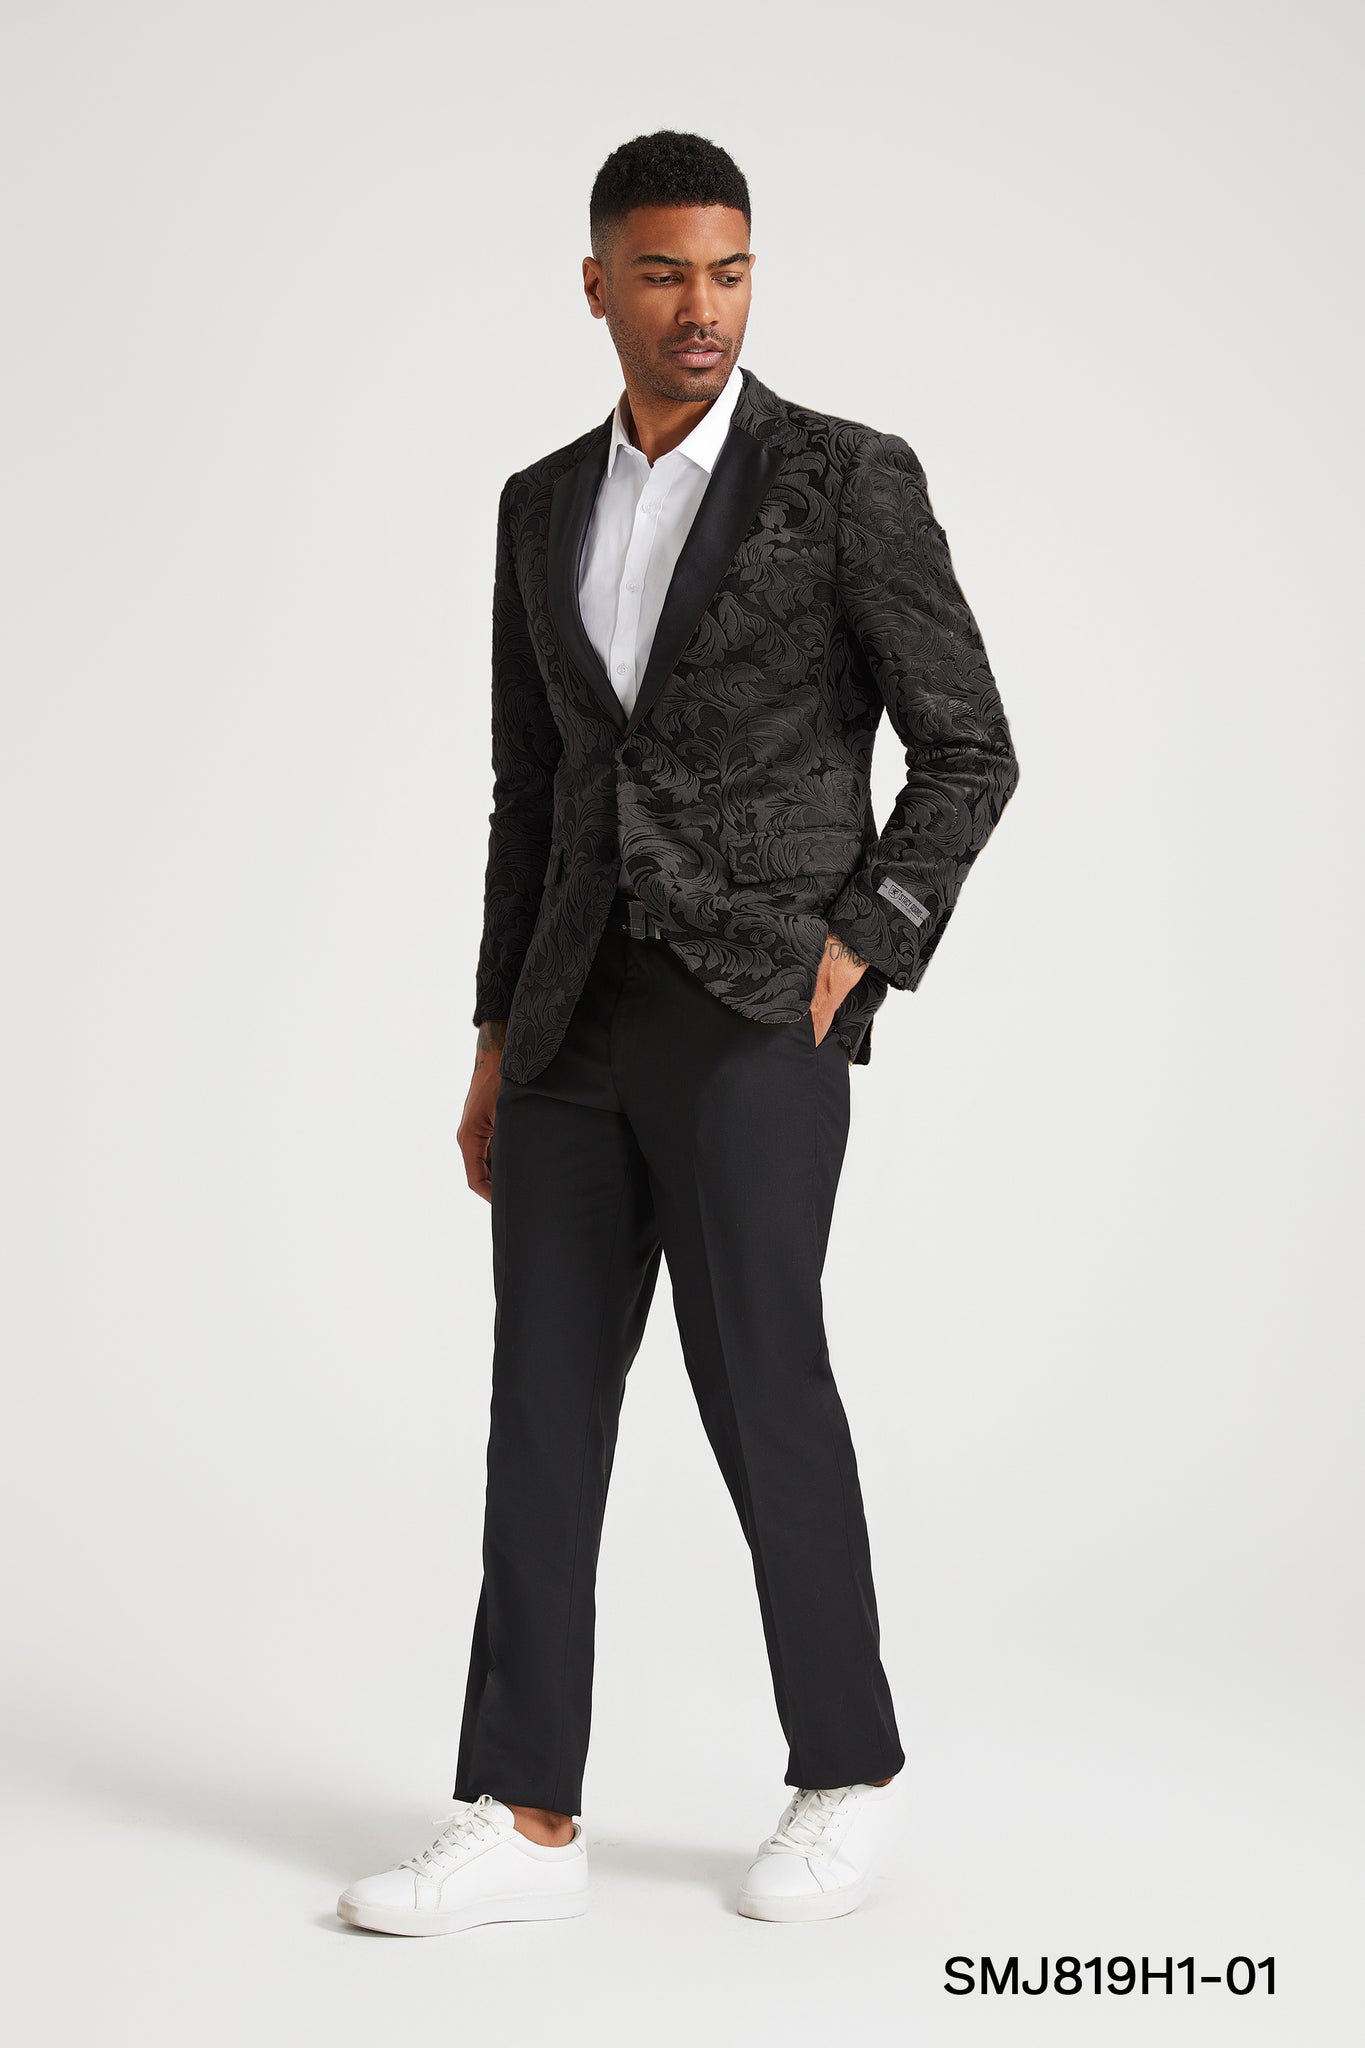 Black Paisley 3-Piece Stacy Adams Jacket for the Modern Man